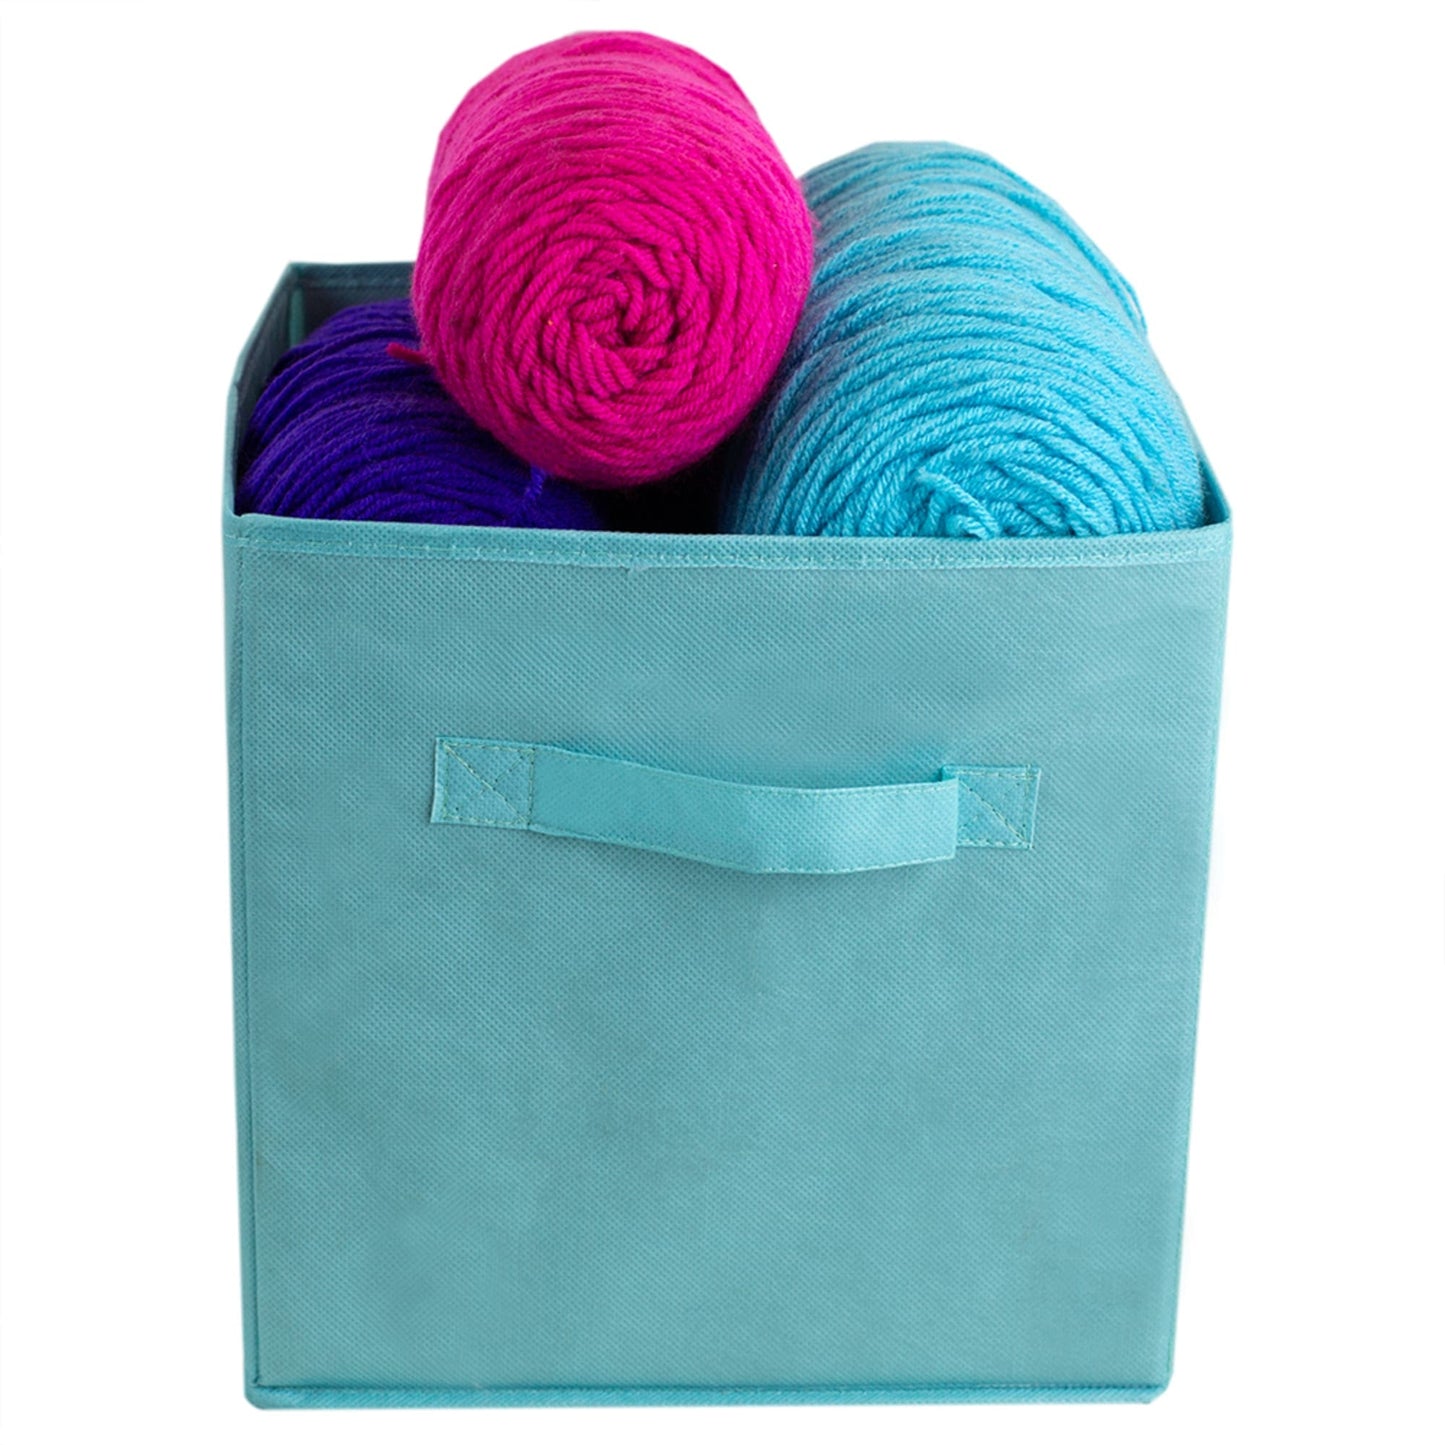 Collapsible and Foldable Non-Woven Storage Cube, Turquoise